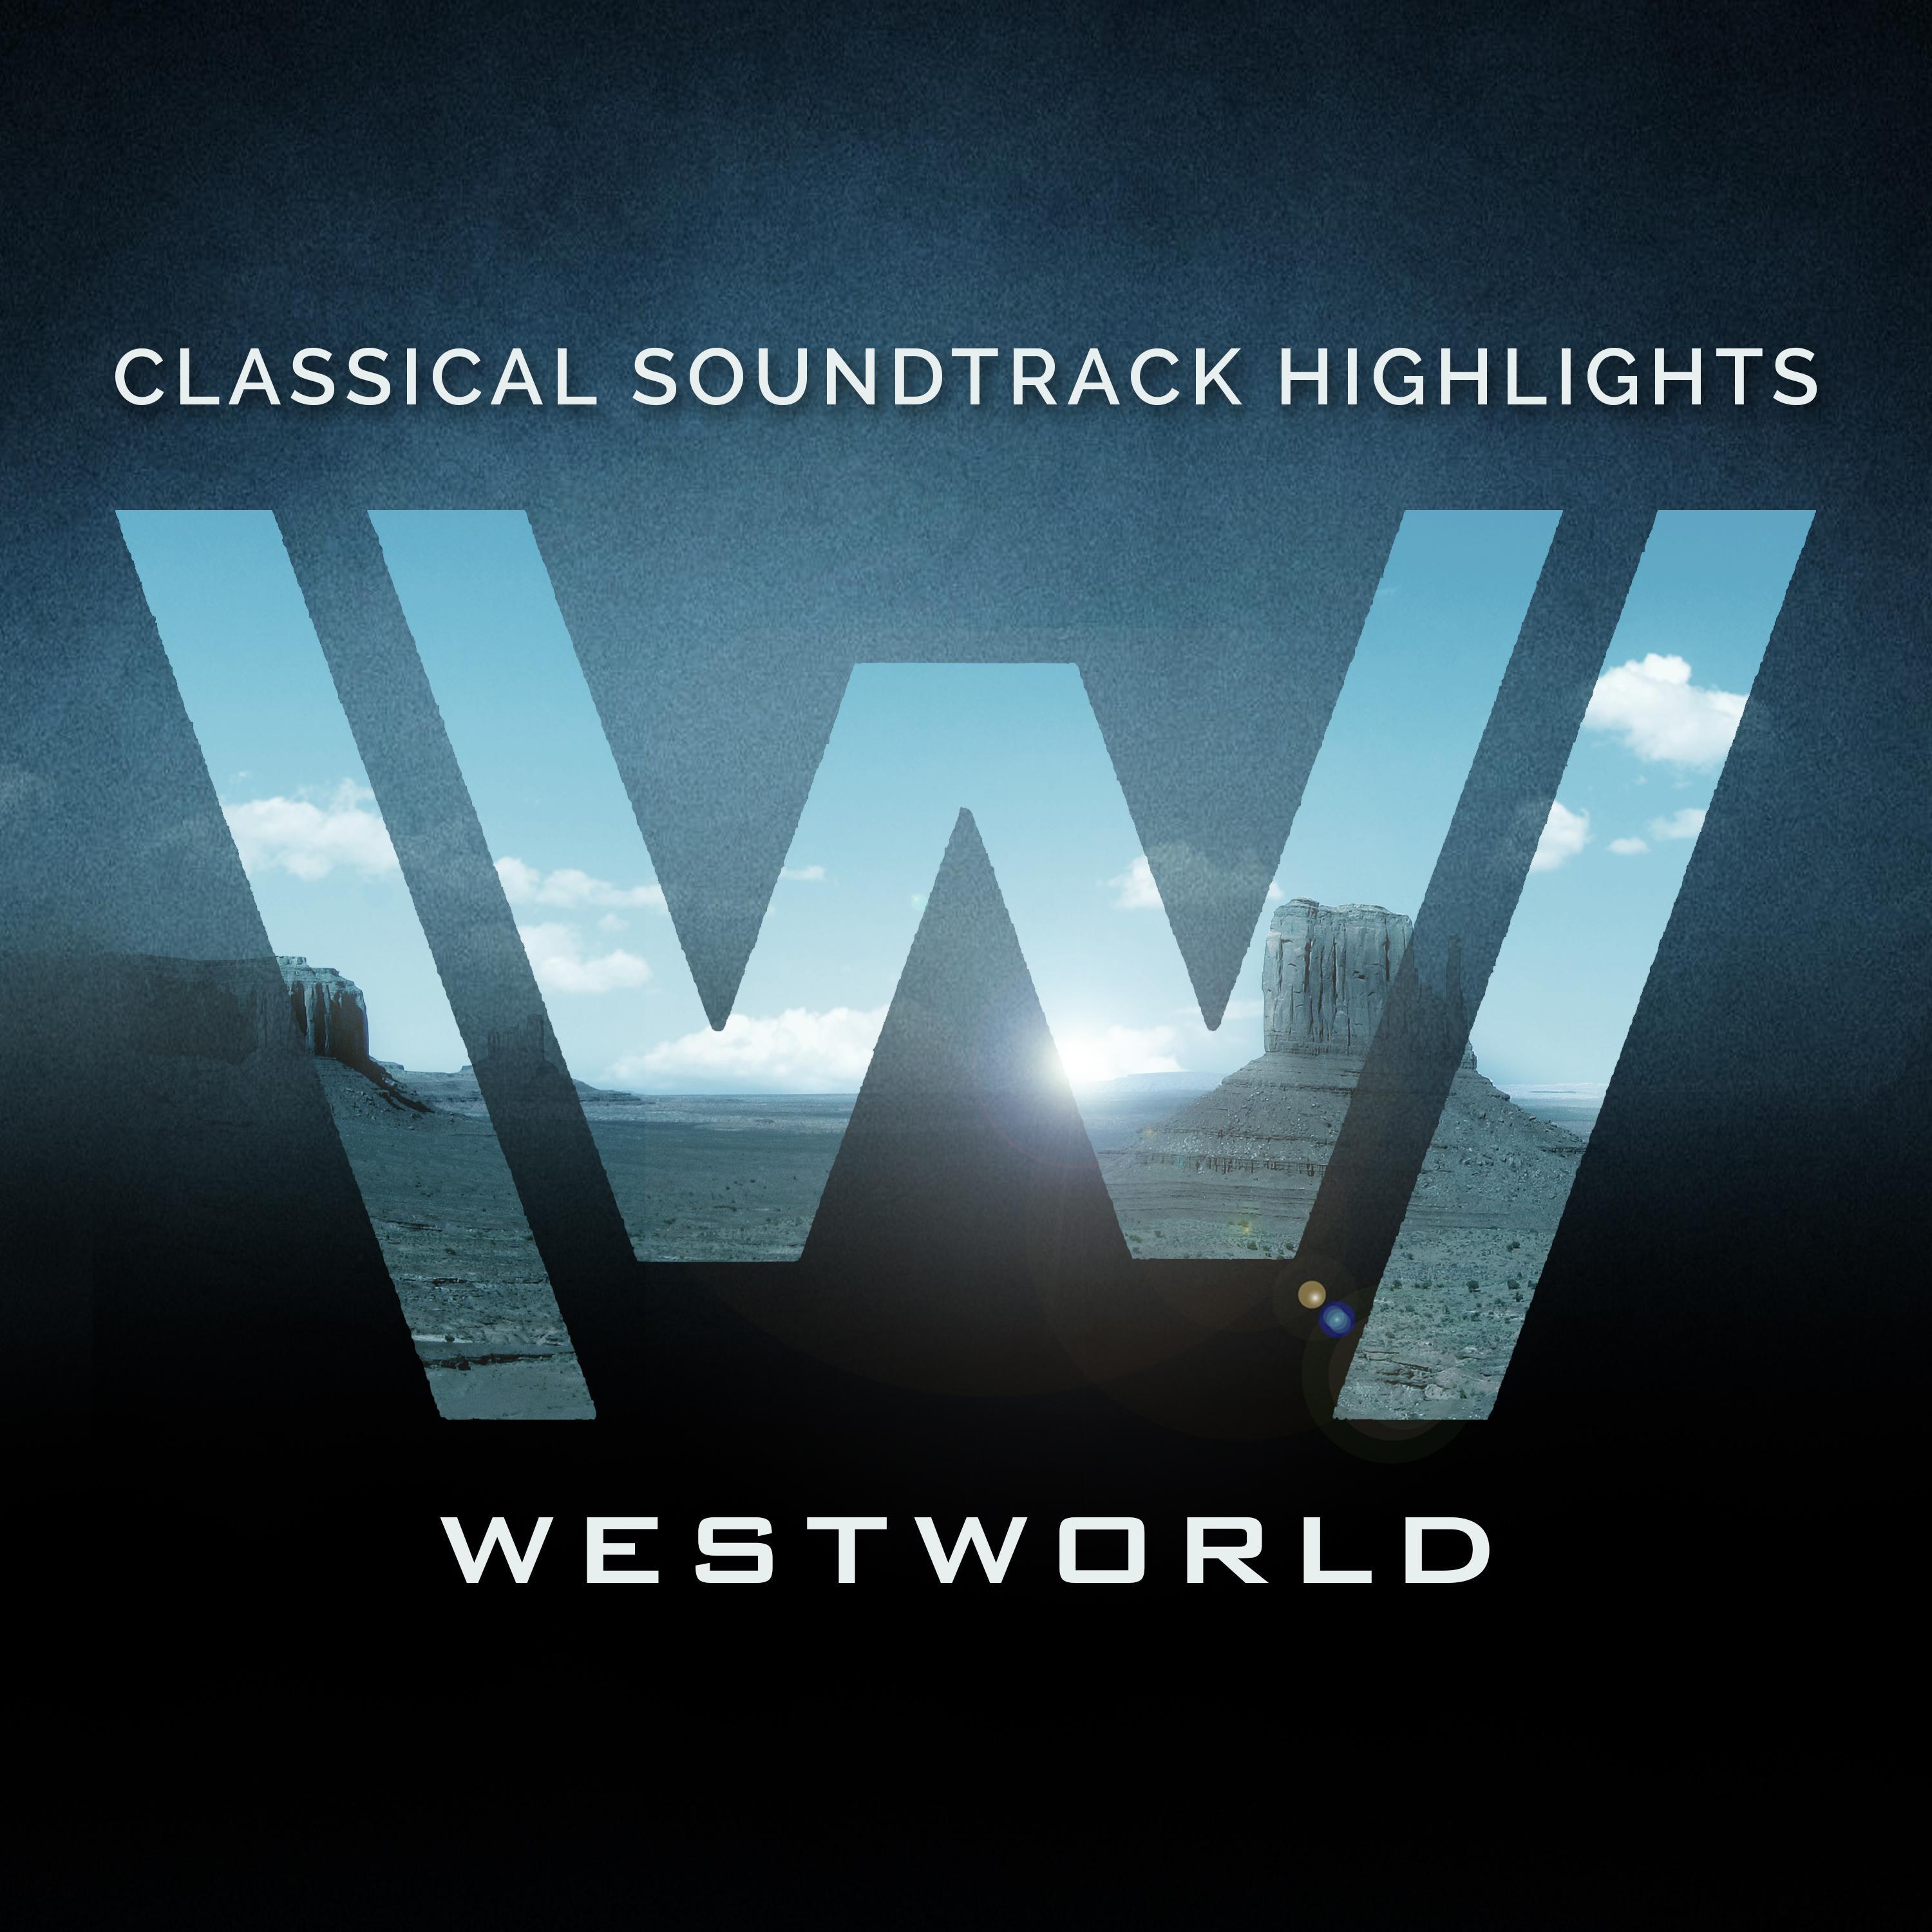 Classical Soundtrack Highlights from Westworld